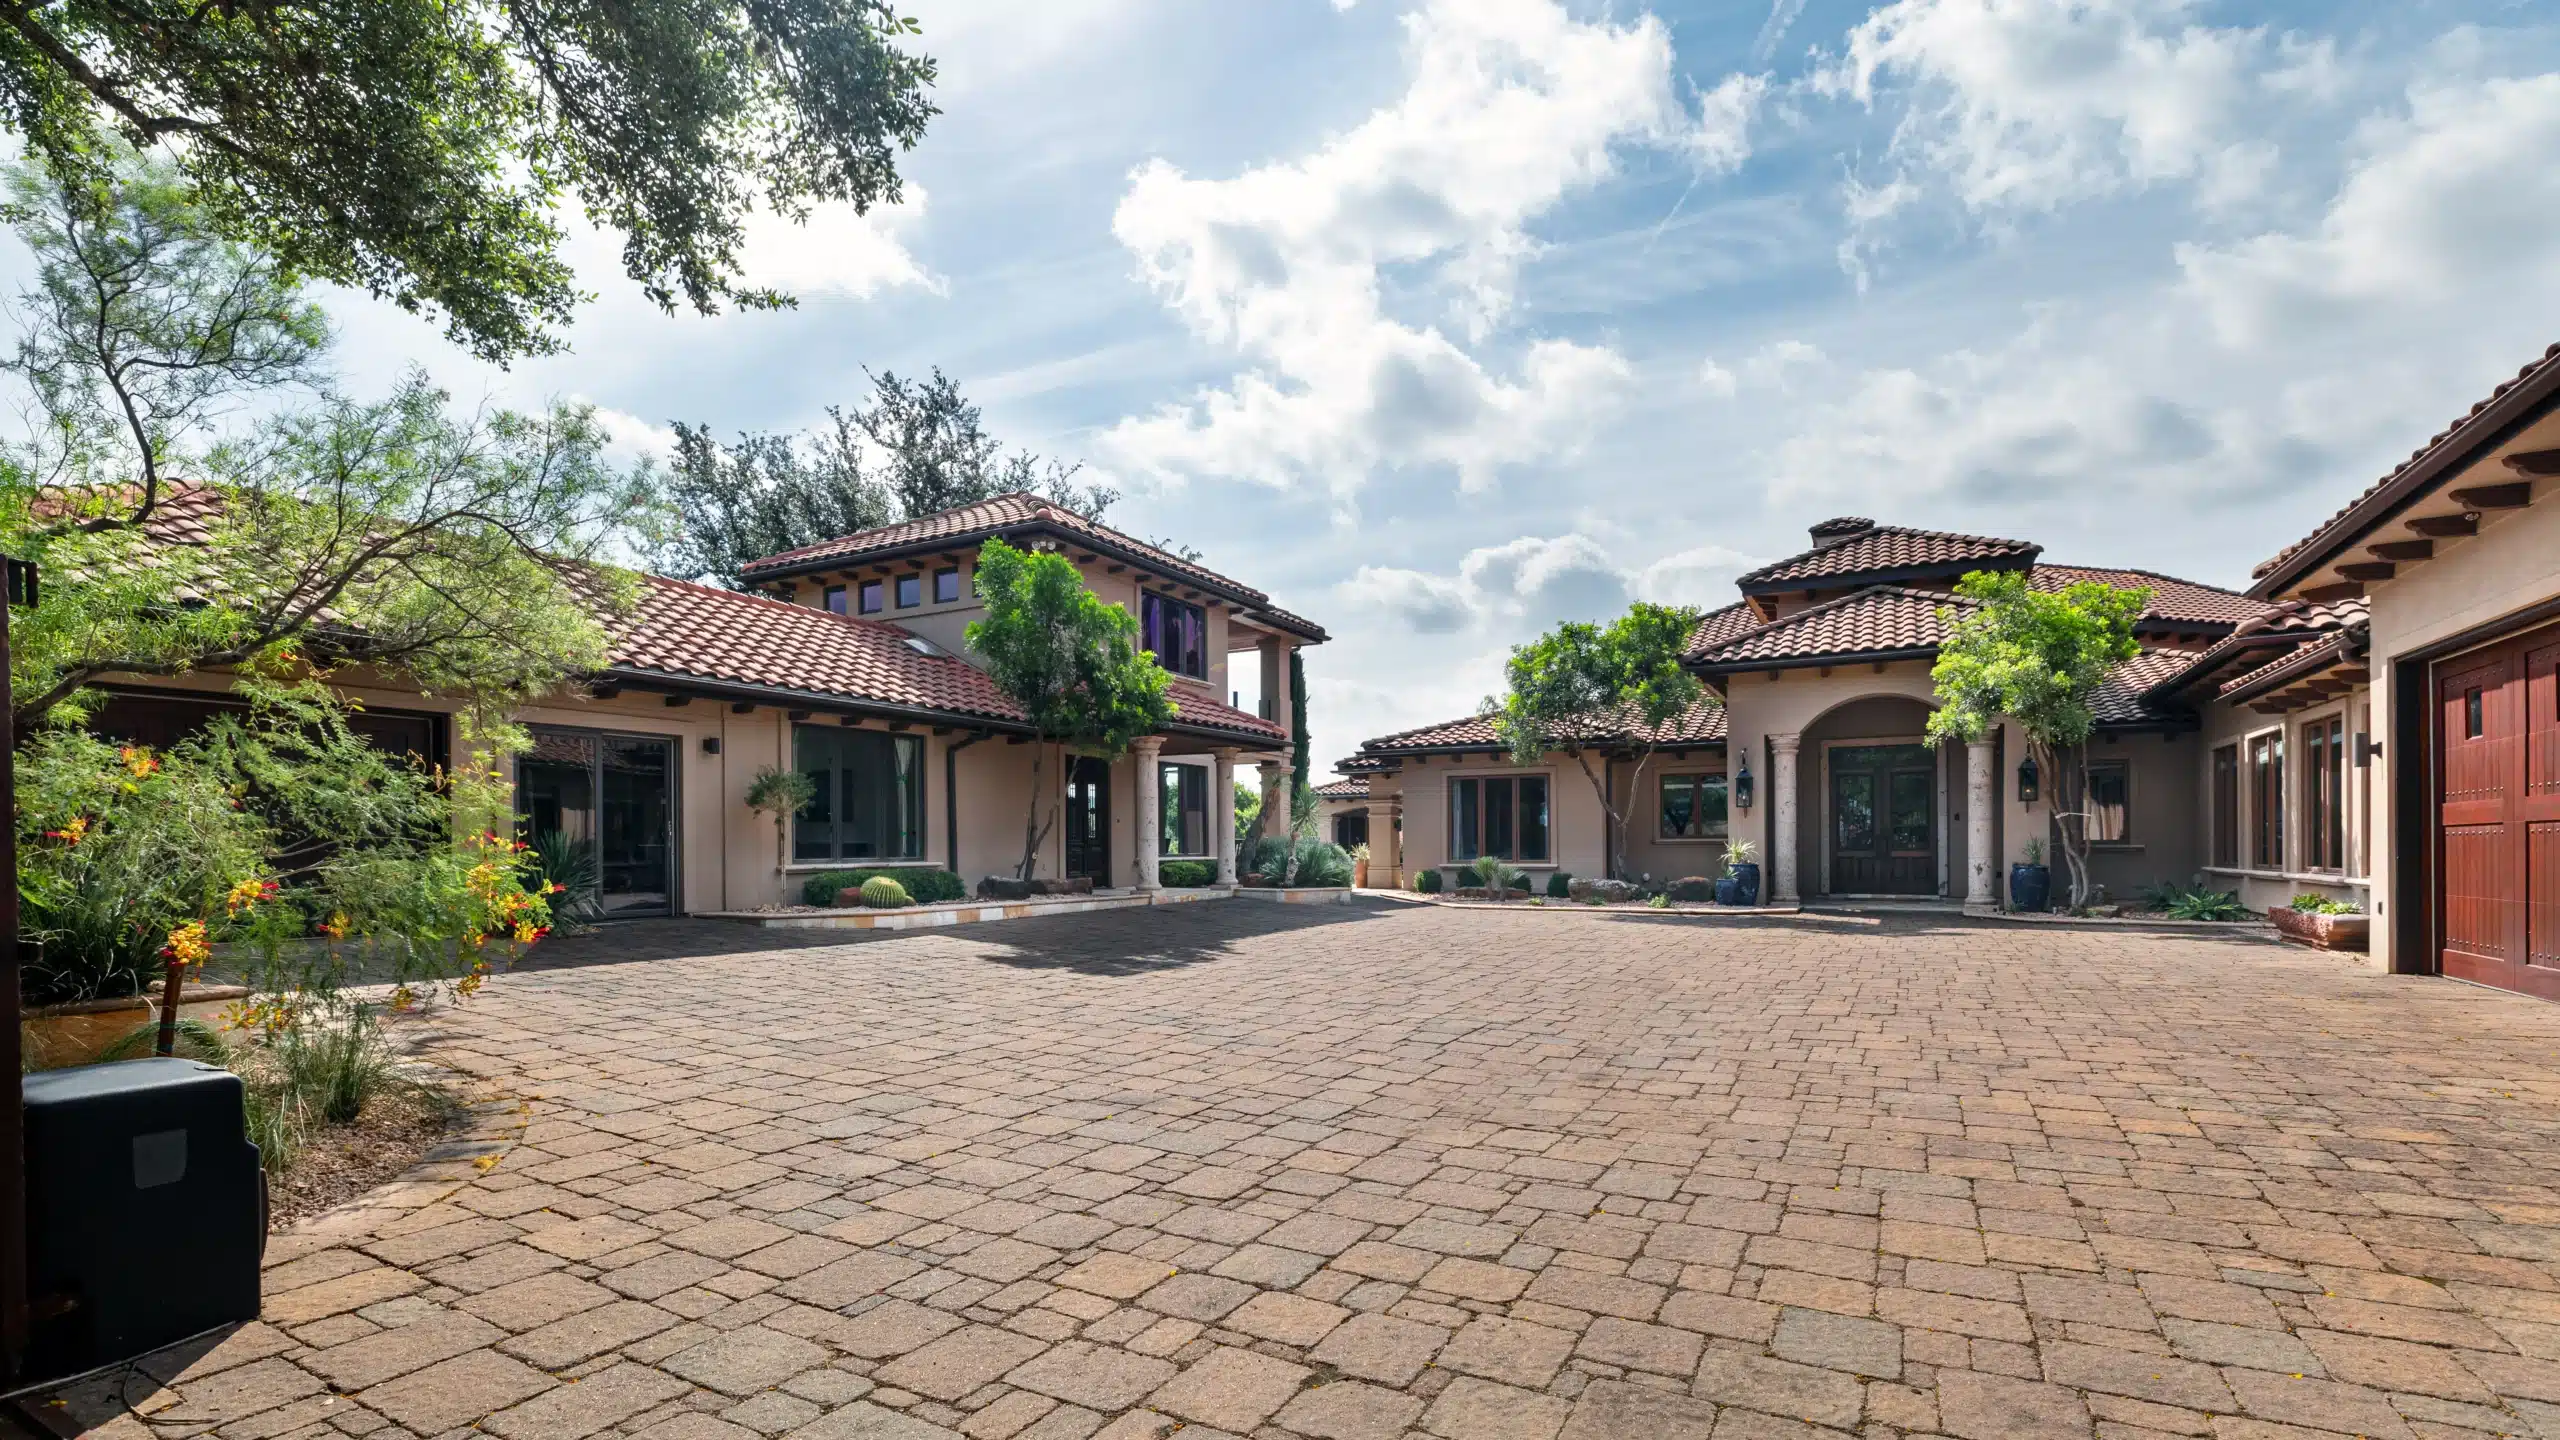 view of Spanish style home and central courtyard with brick pavers and plant accents